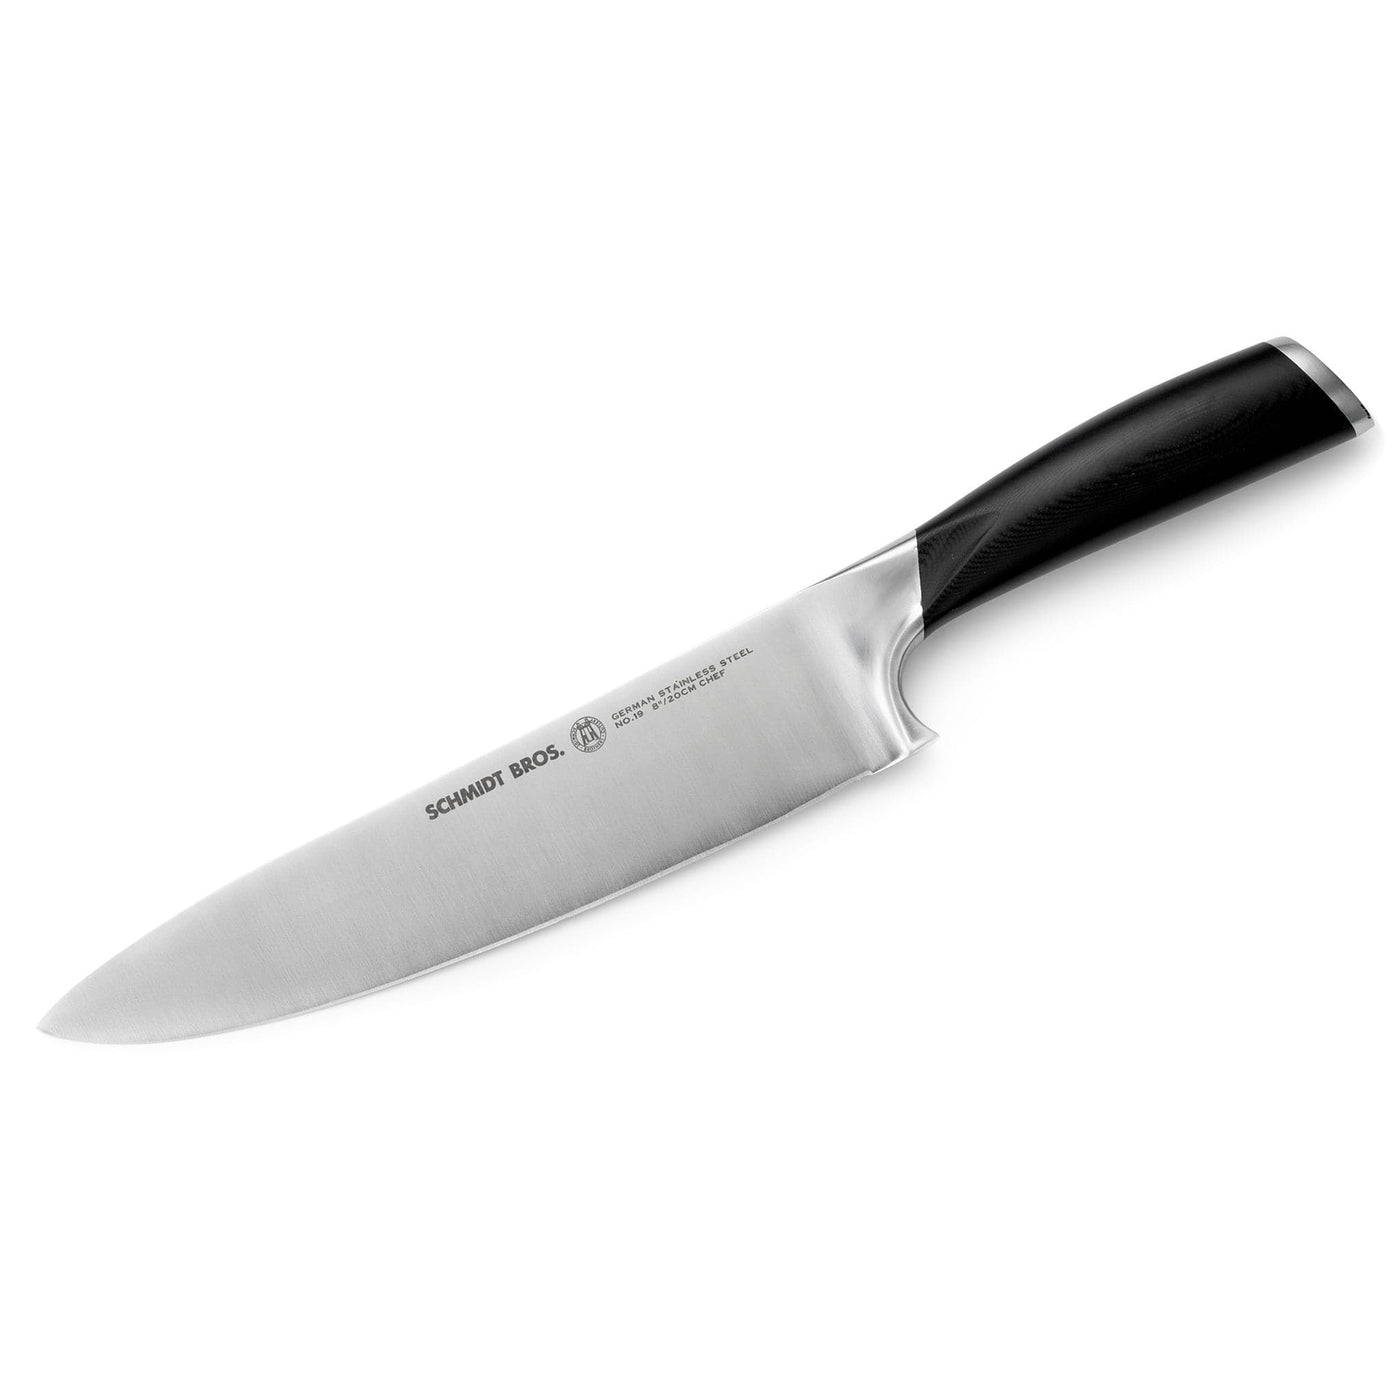 https://schmidtbrothers.com/cdn/shop/files/schmidt-brothers-kitchen-cutlery-schmidt-brothers-heritage-series-12-piece-knife-set-high-carbon-stainless-steel-cutlery-and-acrylic-magnetic-knife-block-30743378362429_1400x.jpg?v=1684154080